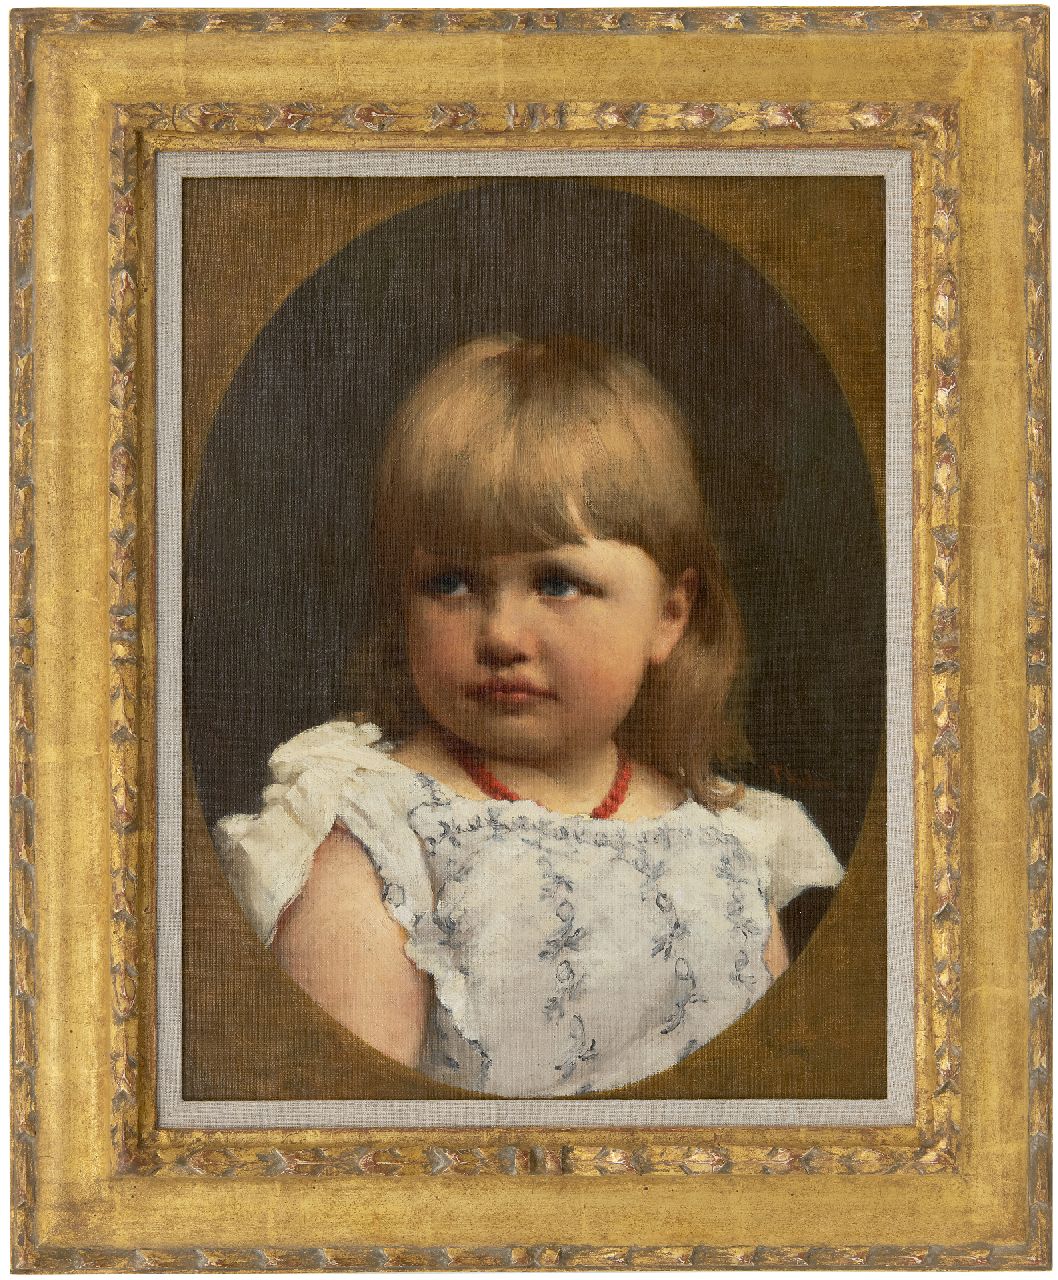 Tholen W.B.  | Willem Bastiaan Tholen | Paintings offered for sale | Portrait of a child, oil on canvas 44.3 x 34.2 cm, signed c.r.